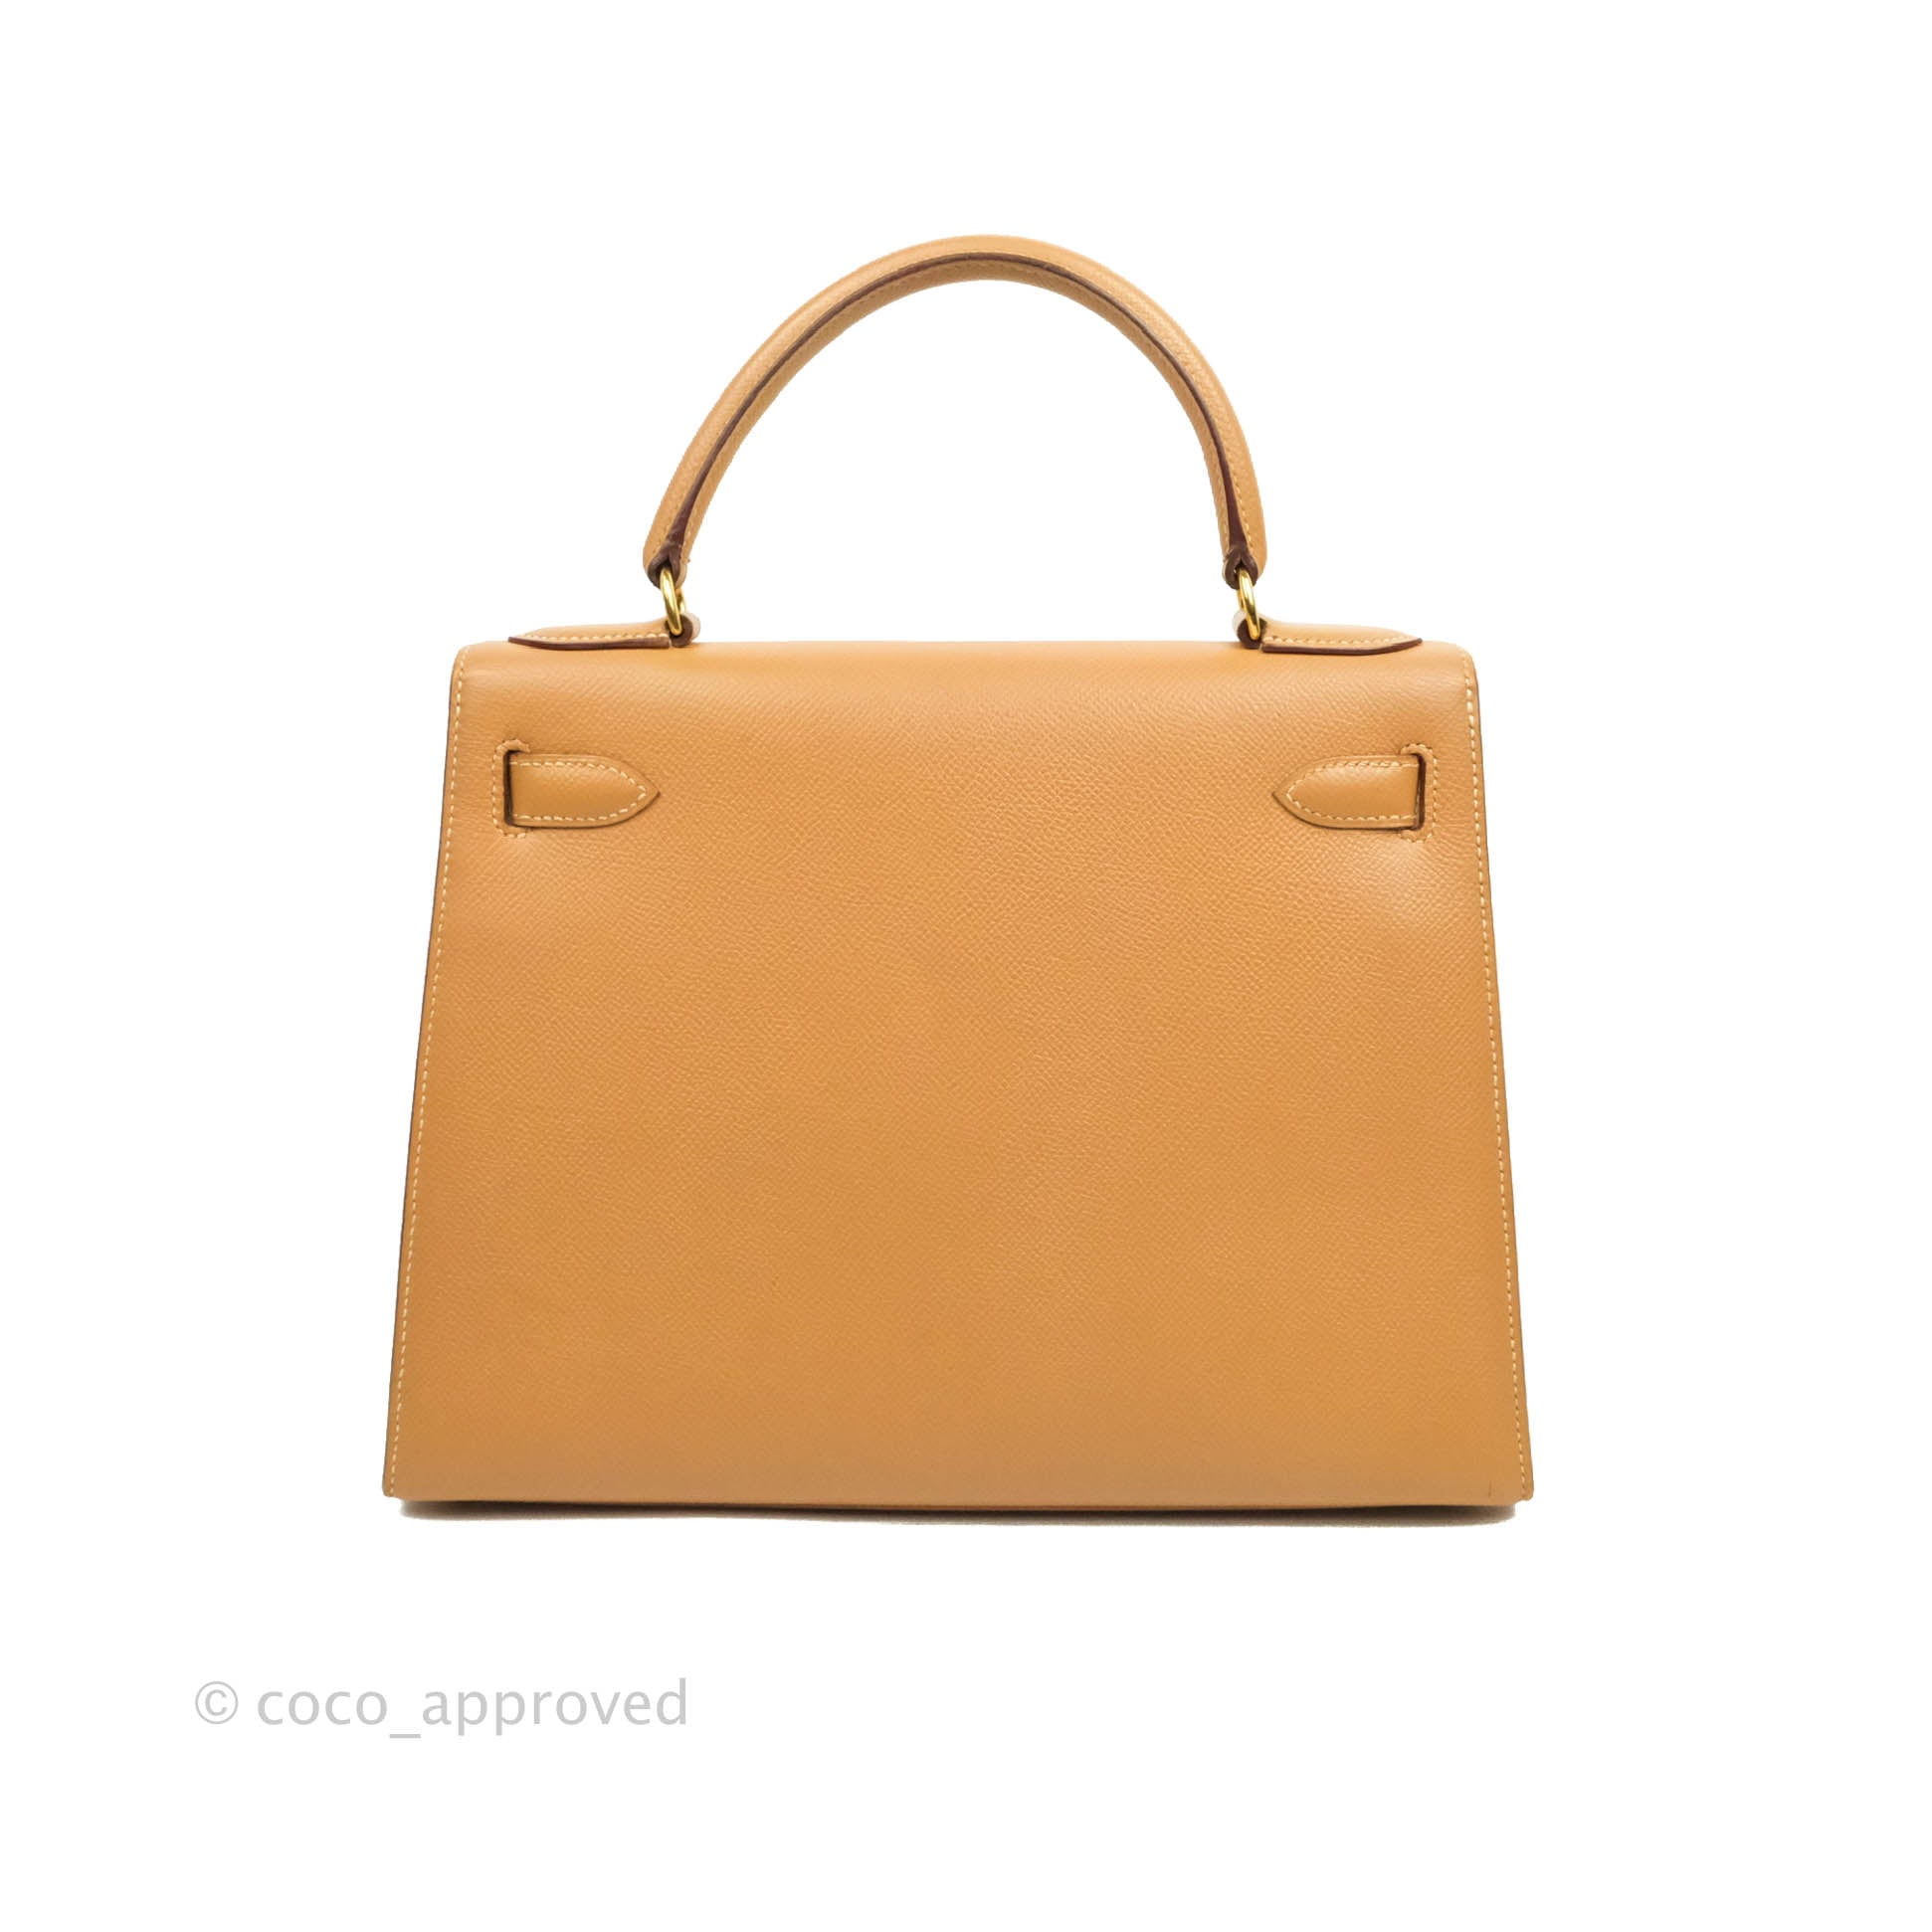 A GOLD COURCHEVEL SELLIER KELLY 28 BAG WITH GOLD HARDWARE, HERMÈS, 1994